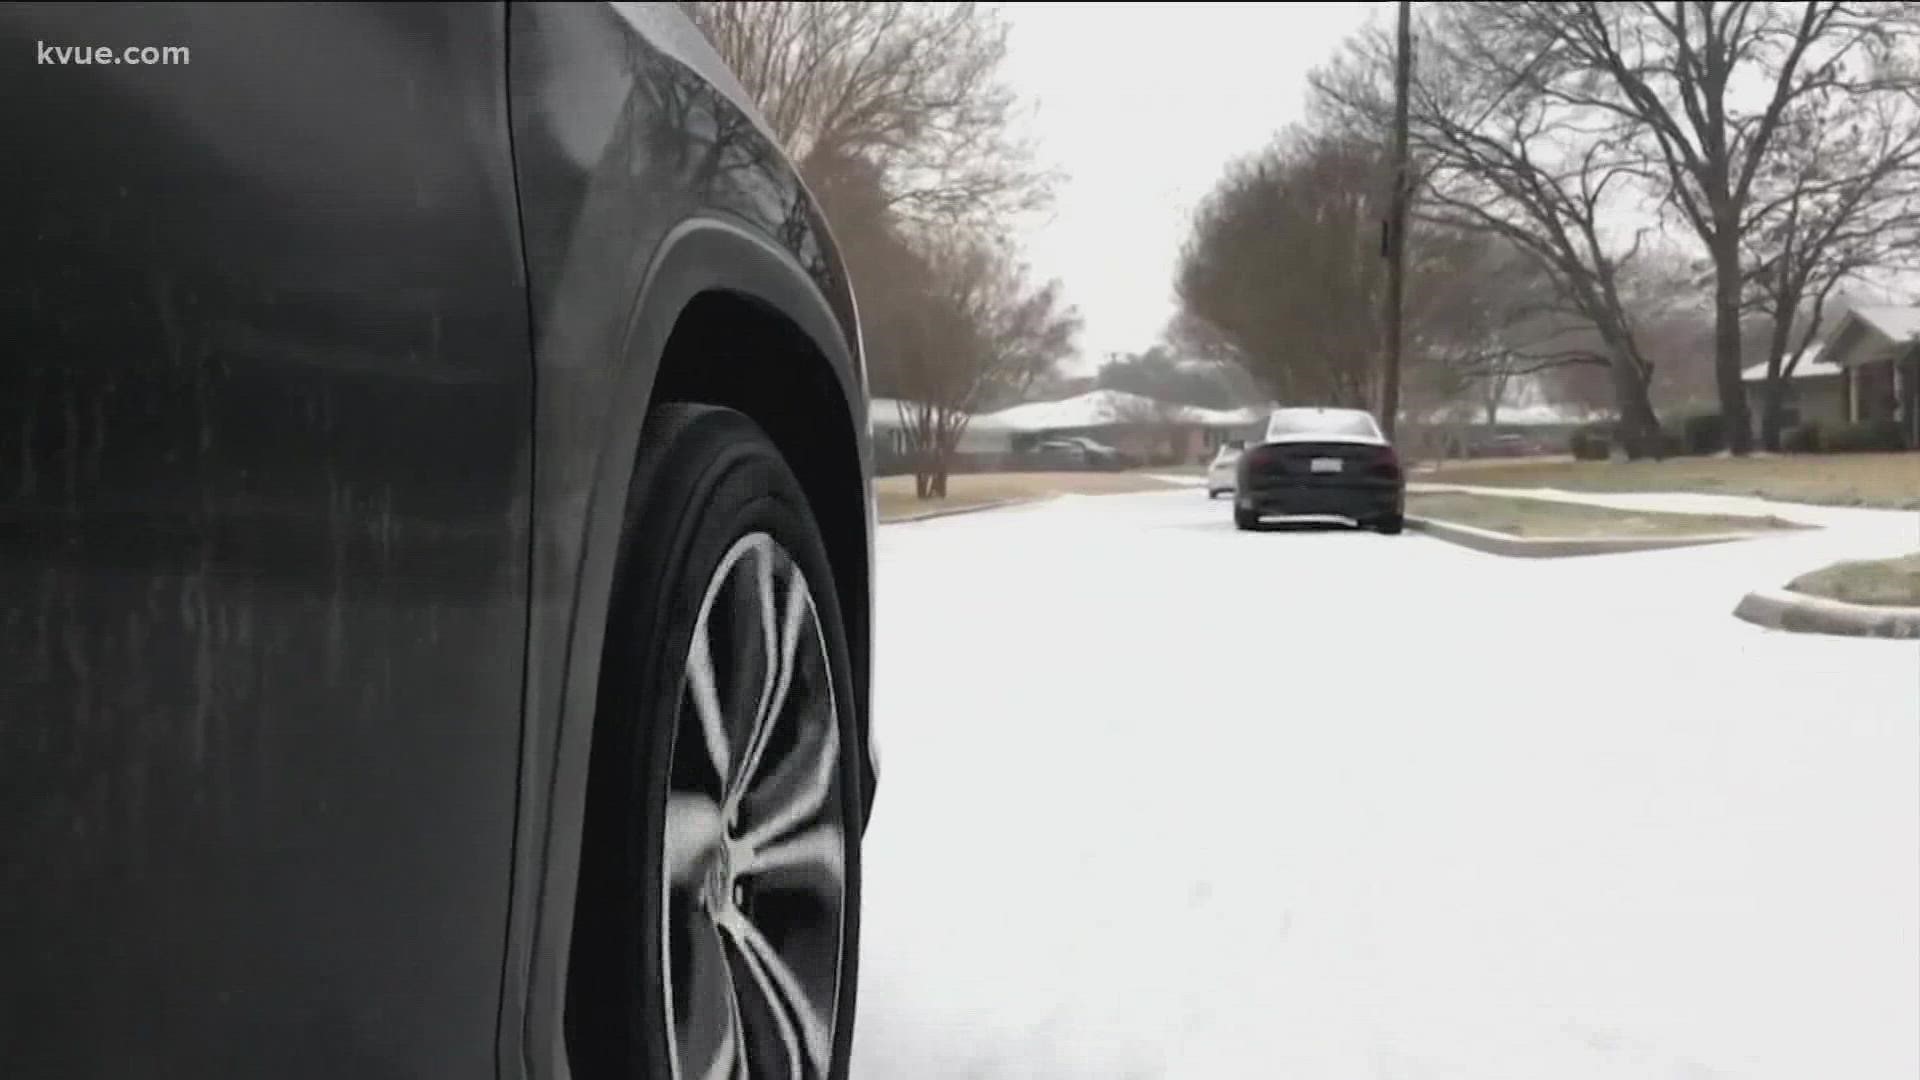 Here's what you can do if you absolutely need to drive somewhere during icy weather conditions.